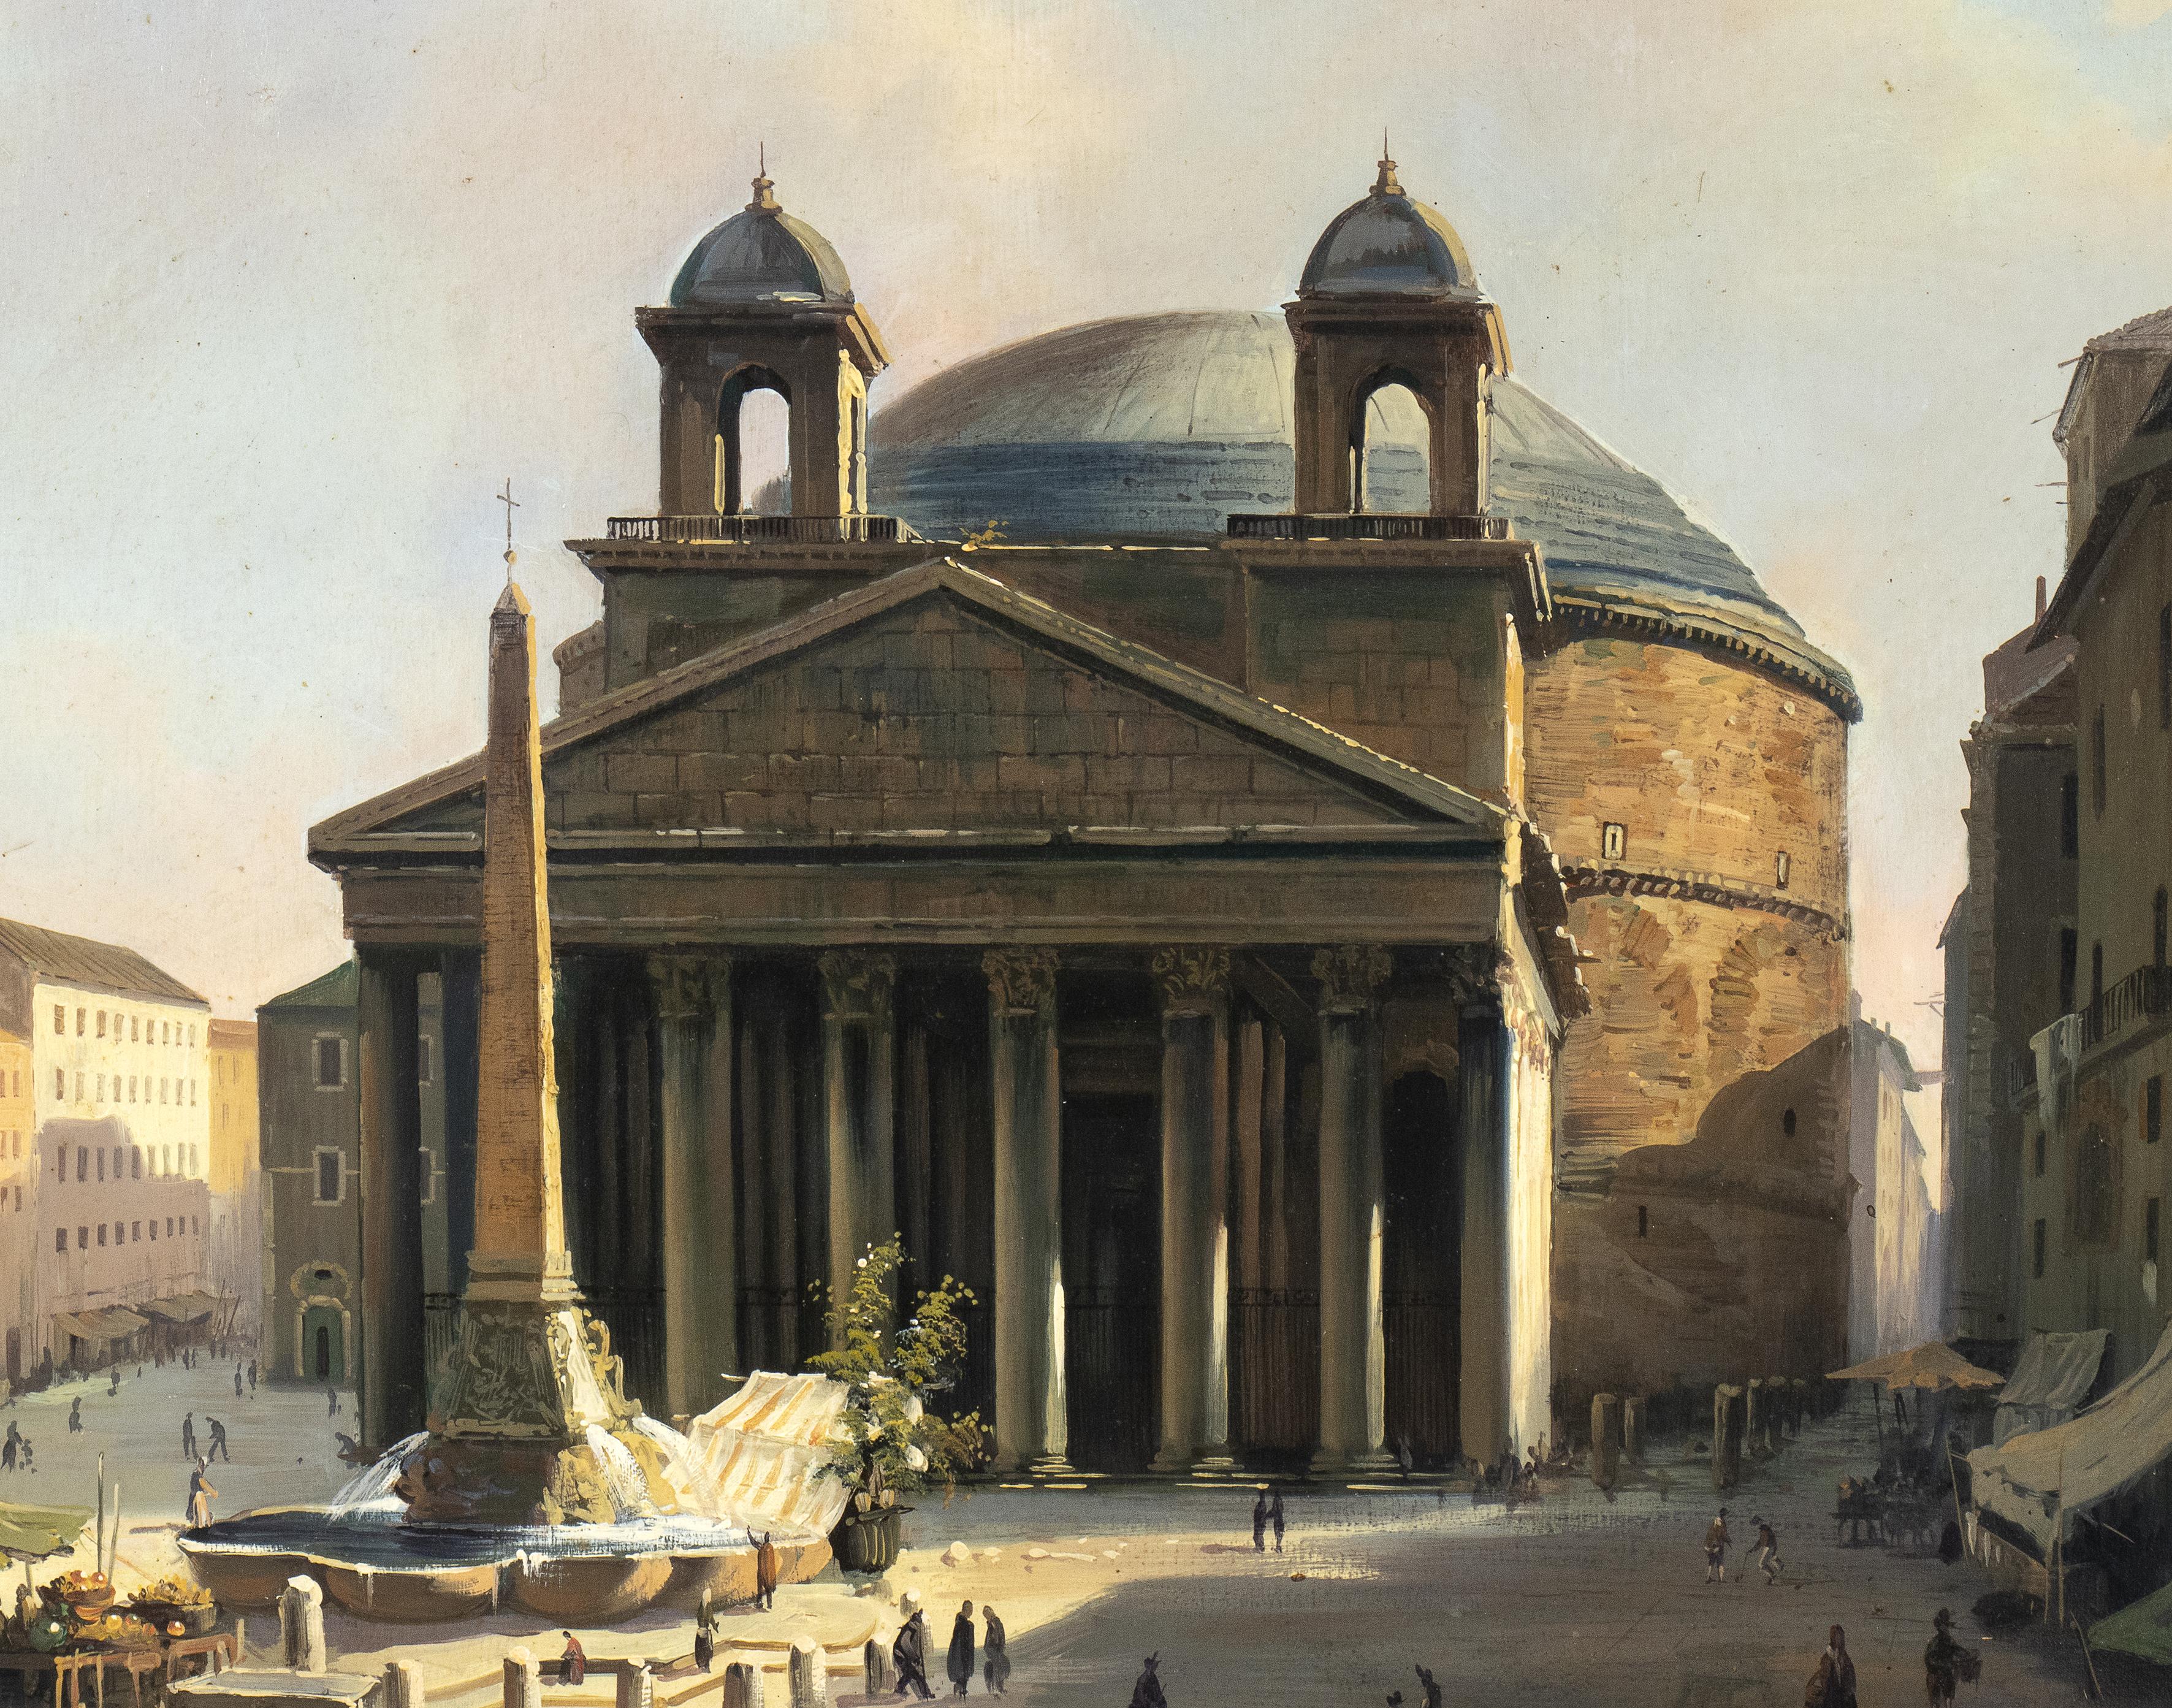 Landscape Oil Painting View Of Pantheon Rome Italian School Late 19th Century For Sale 1